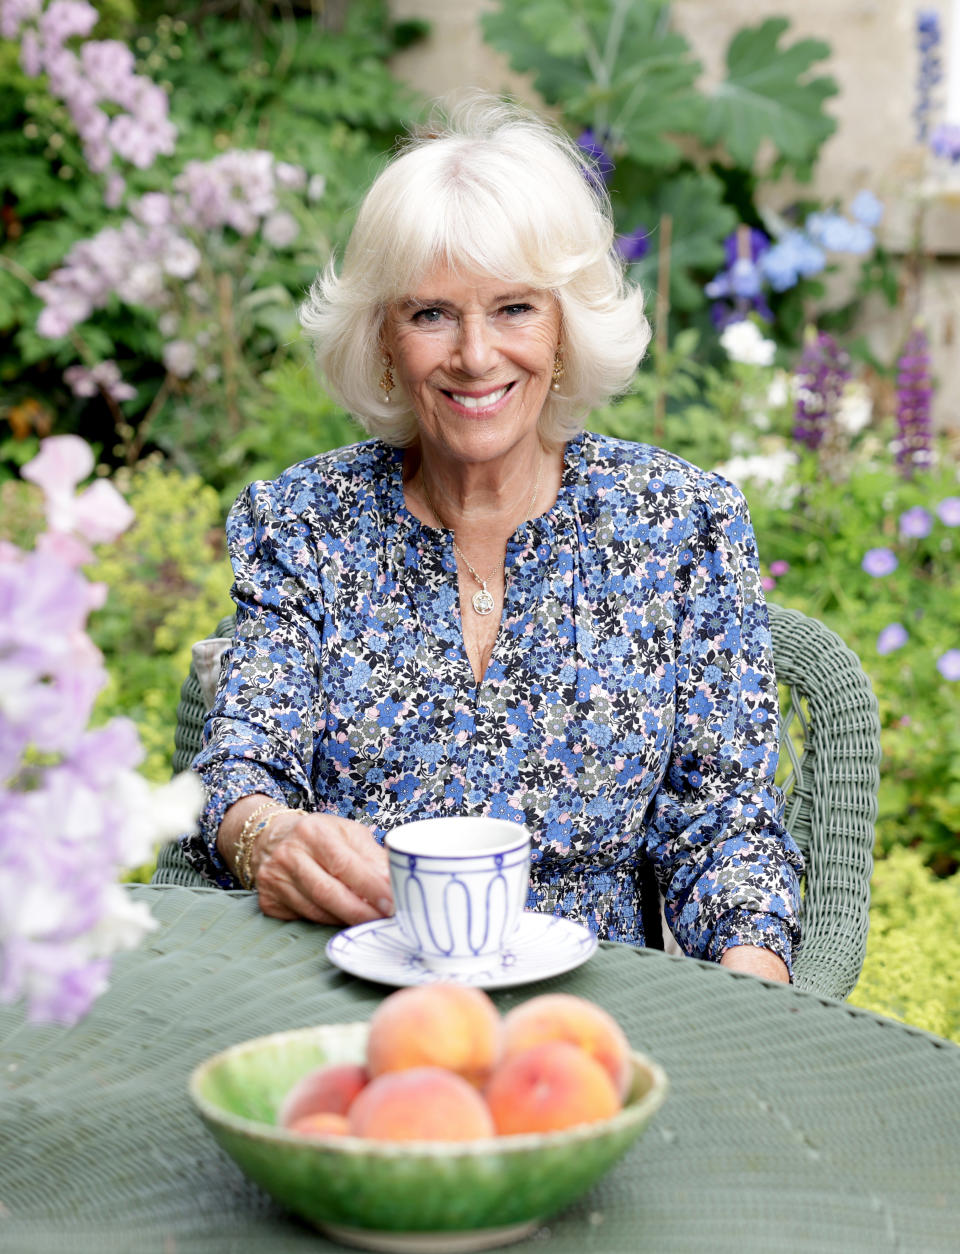 Camilla is wearing a blue floral Sophie Dundas summer dress while posing for the photograph in her garden with a cup of tea and a bowl of peaches on the table. - Credit: Clarence House via Getty Images